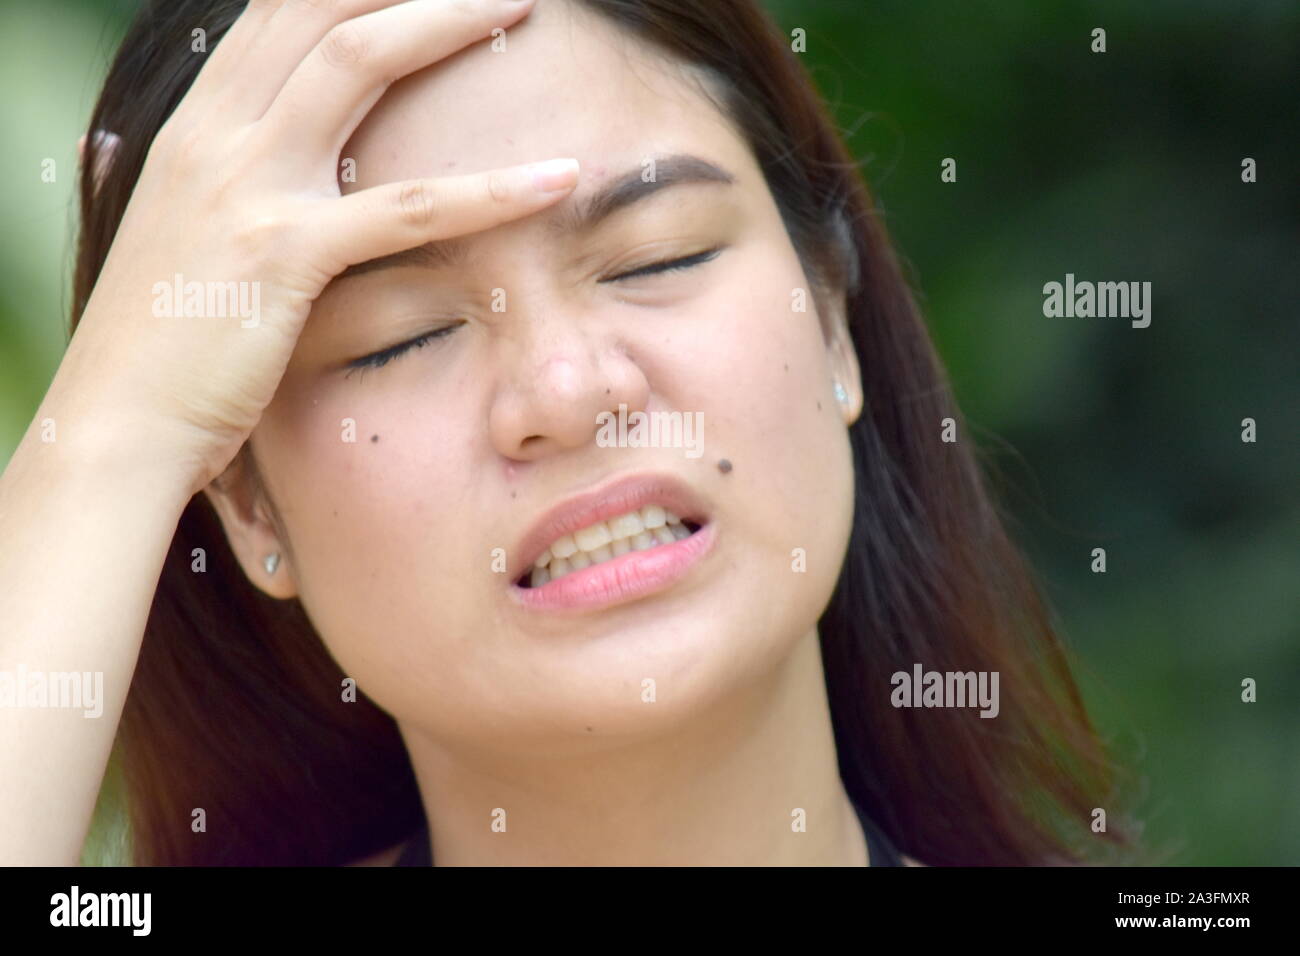 A Filipina Woman And Anxiety Stock Photo